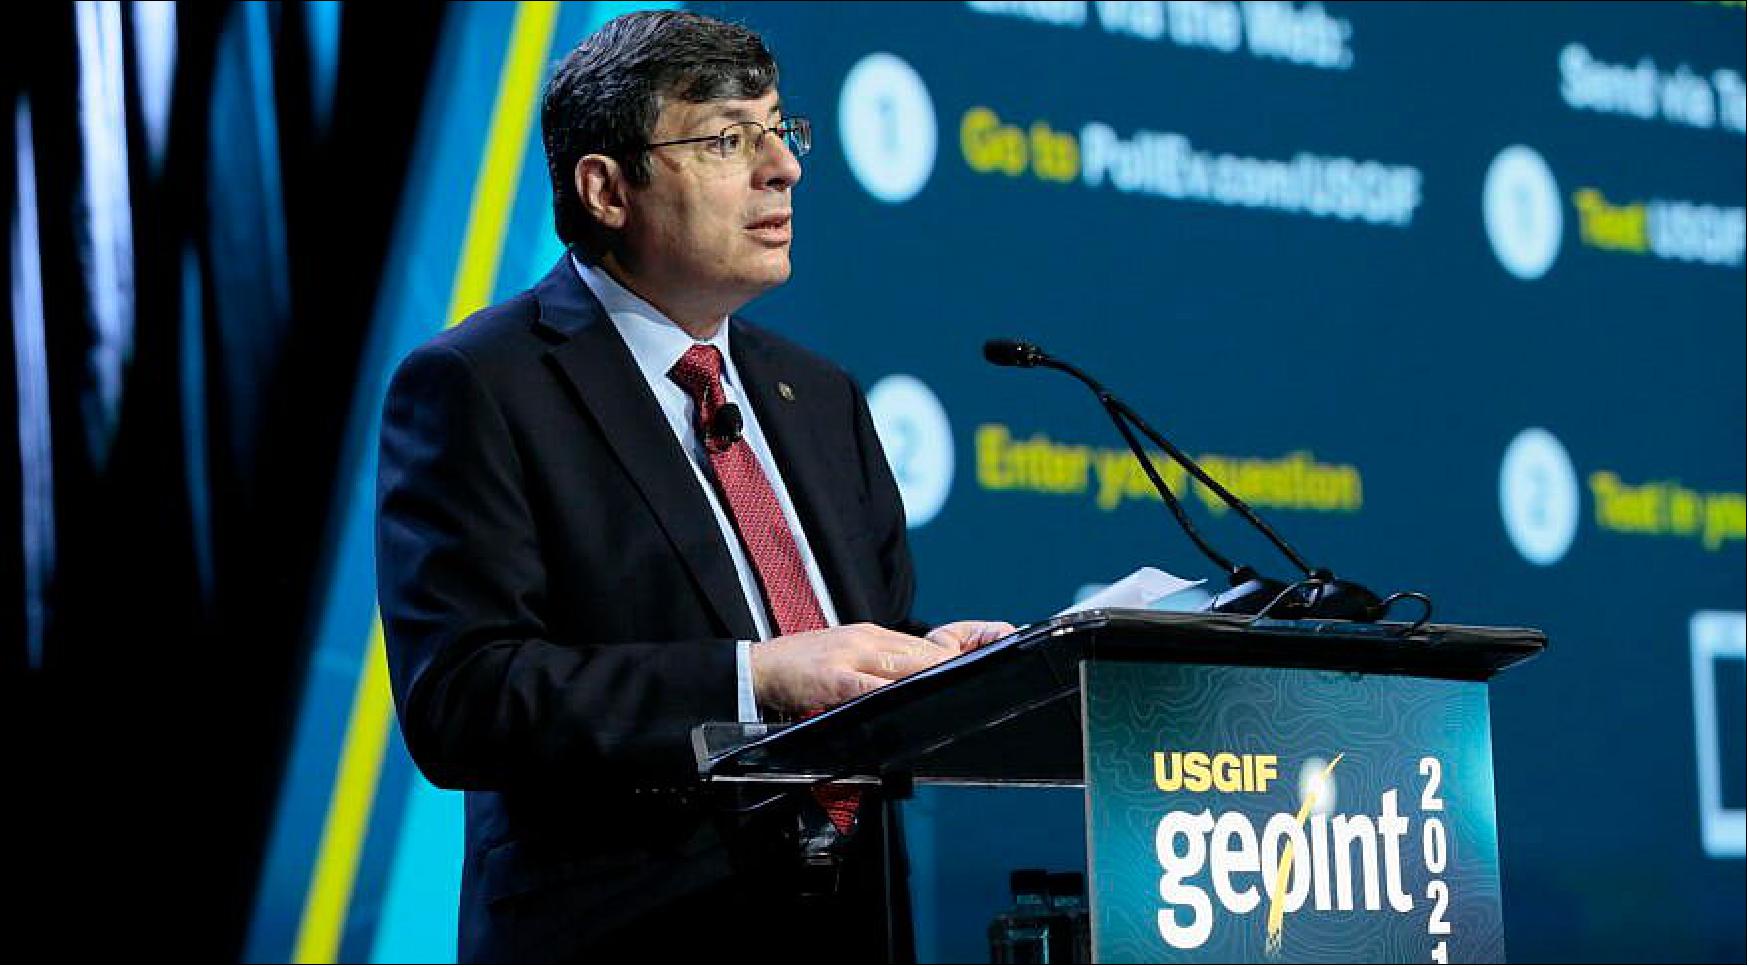 Figure 1: National Reconnaissance Office Director Chris Scolese speaks Oct. 7 at the 2021 GEOINT Symposium (image credit: USGIF)